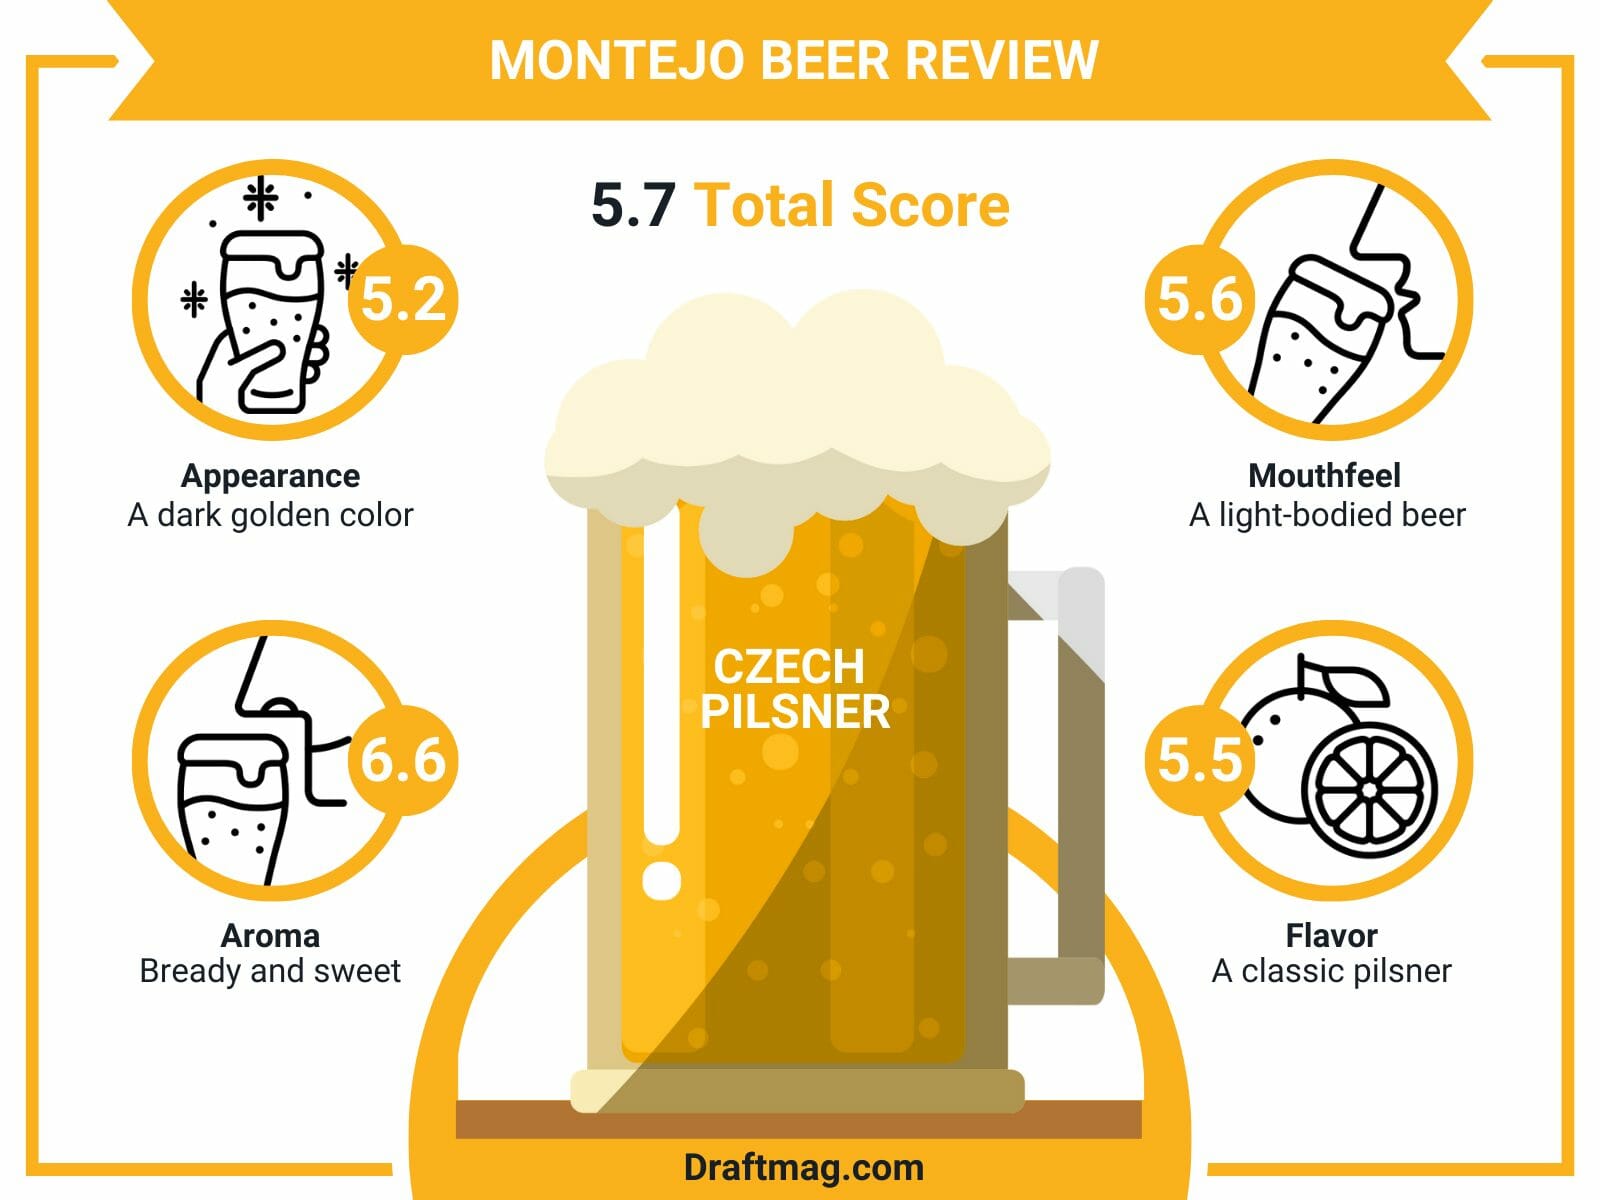 Montejo beer review infographic